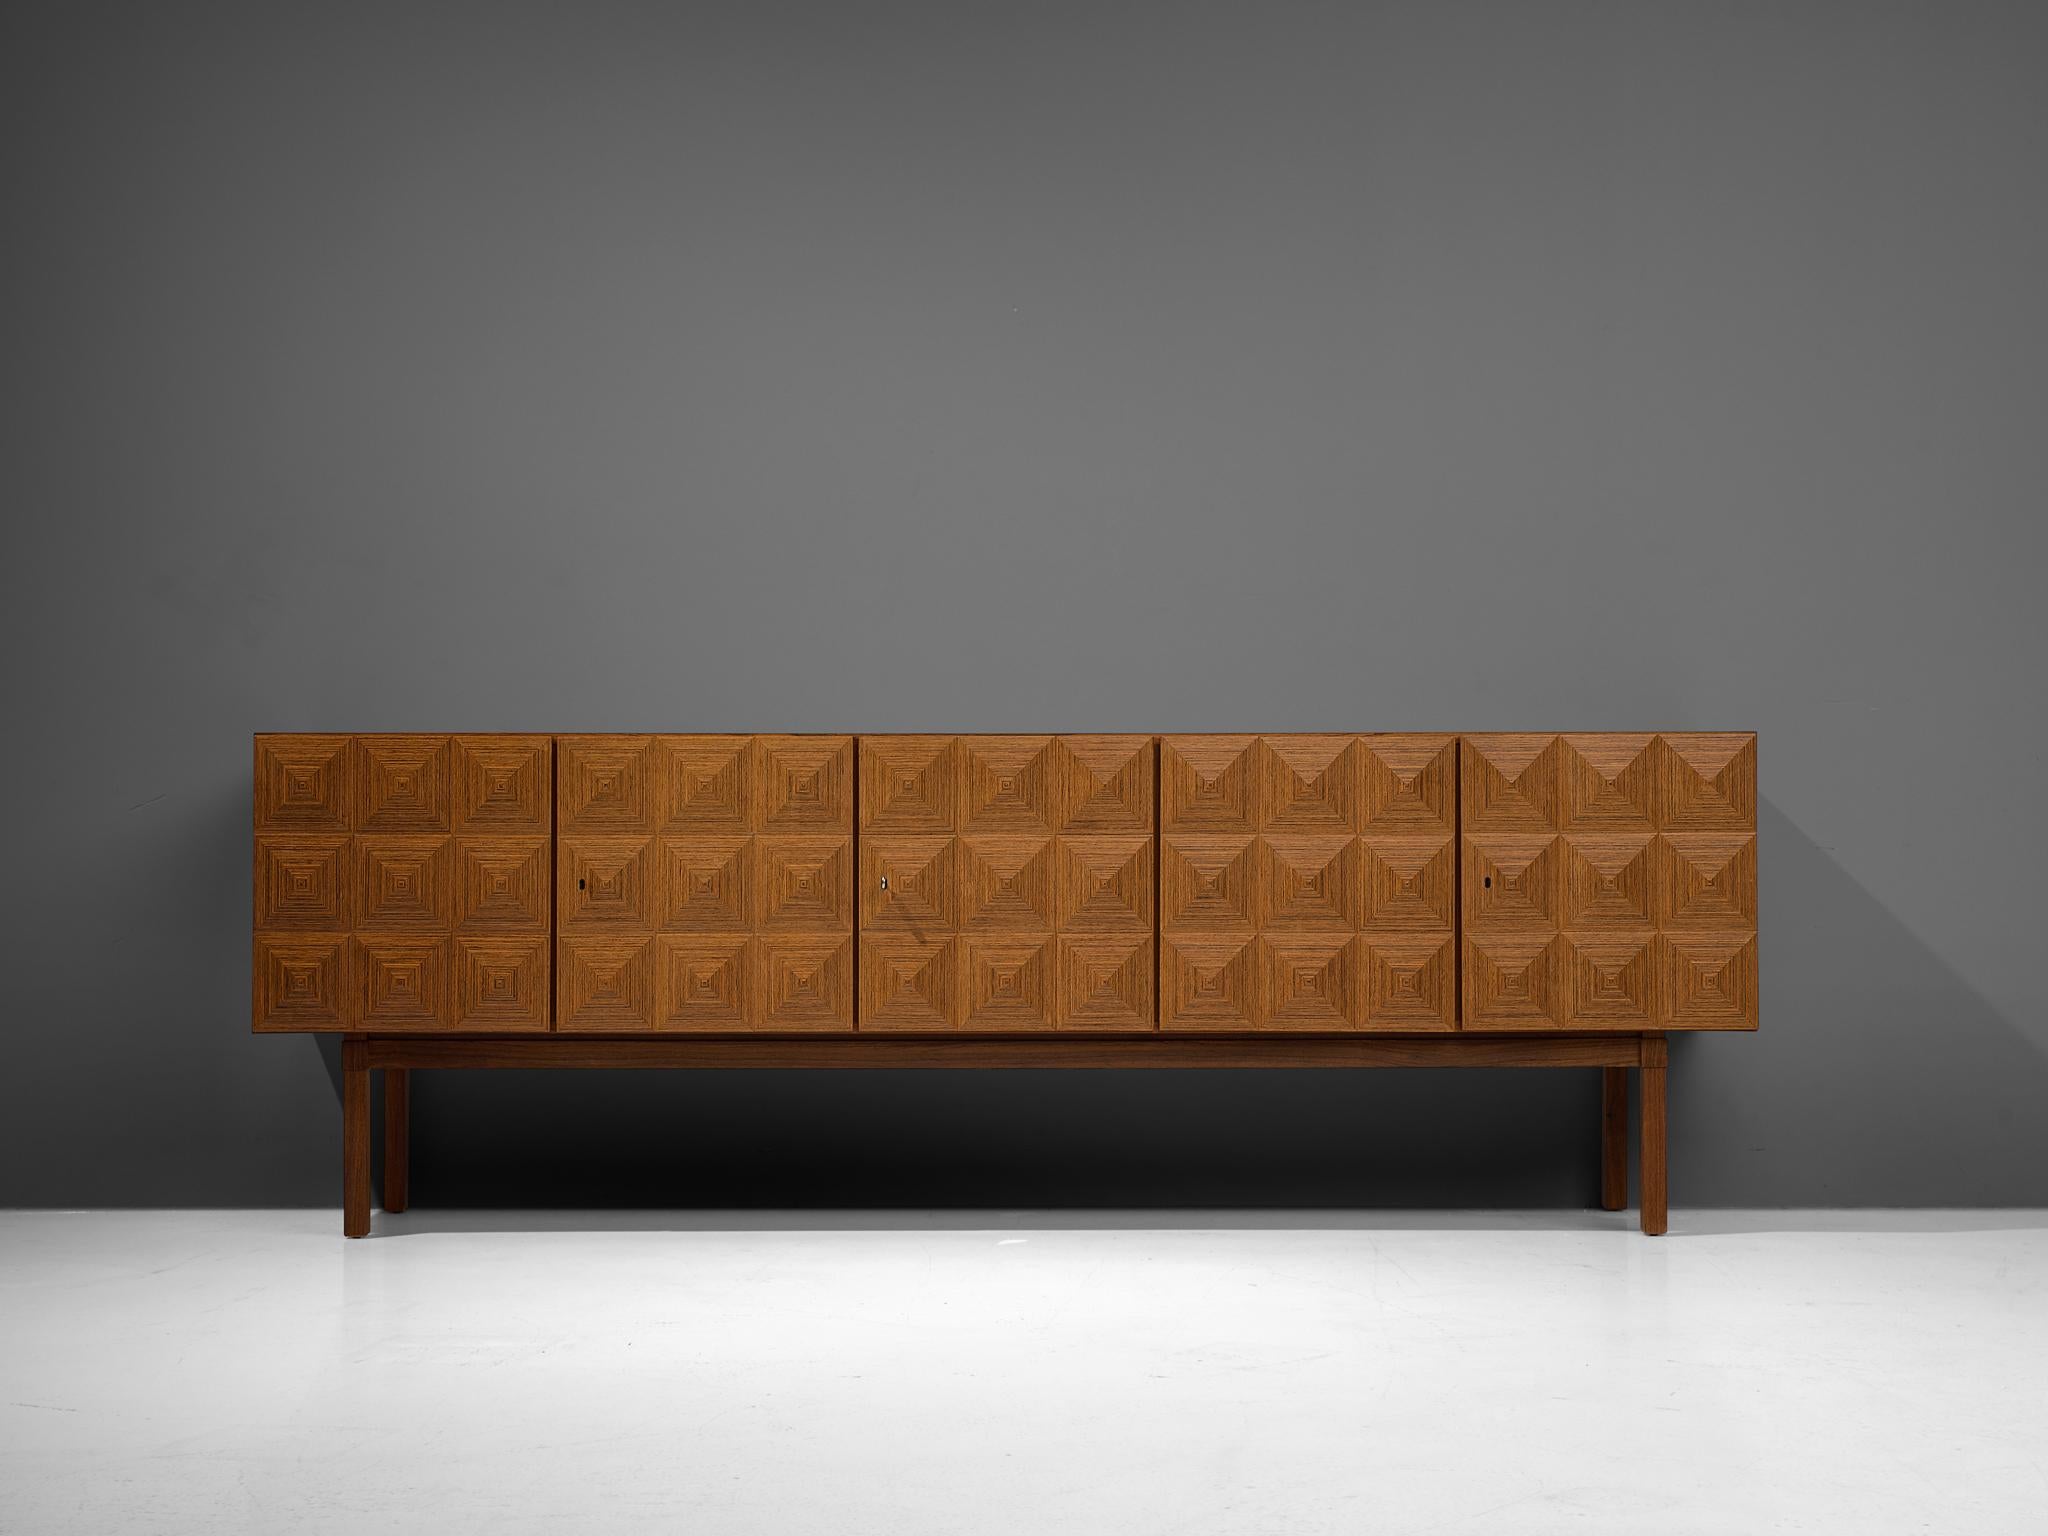 Franz Meyer, sideboard, rosewood, Germany, 1960s

Subtle ‘brutal looking’ sideboard by master furniture maker Franz Meyer from the 1960s. The doors of this cabinet feature a diamond-shaped structure, which highlights the rosewood in an